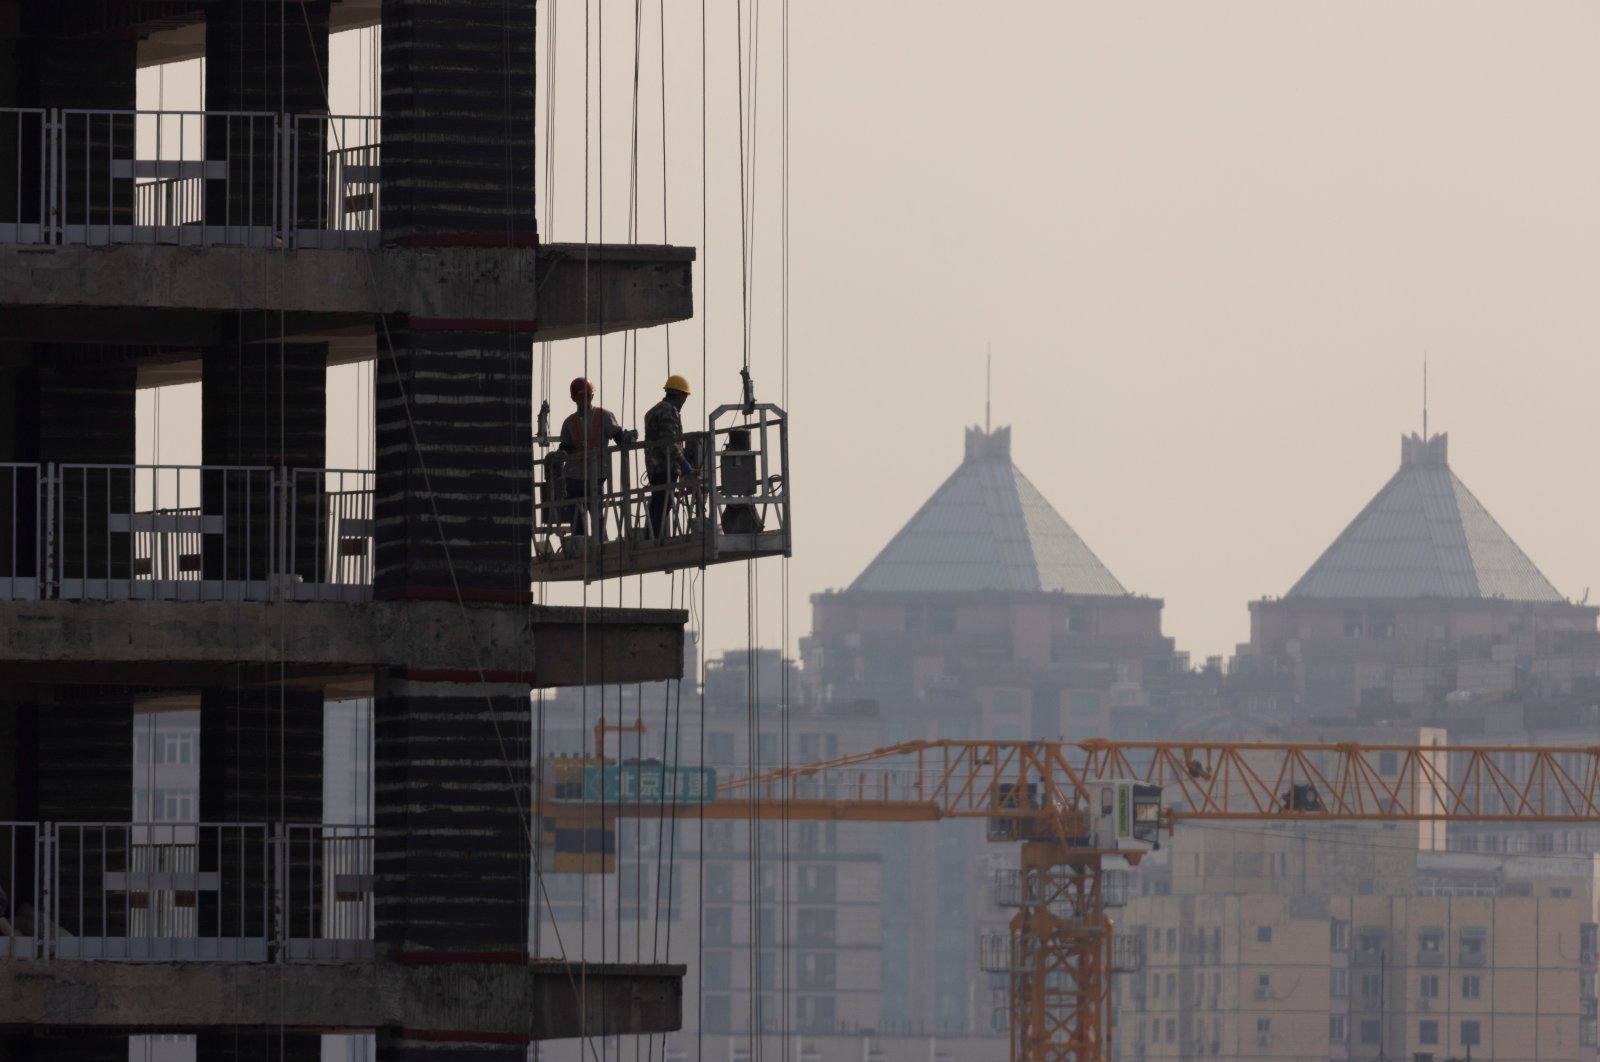 Men work at the construction site of a highrise building in Beijing, China, Oct. 18, 2021. (Reuters Photo)